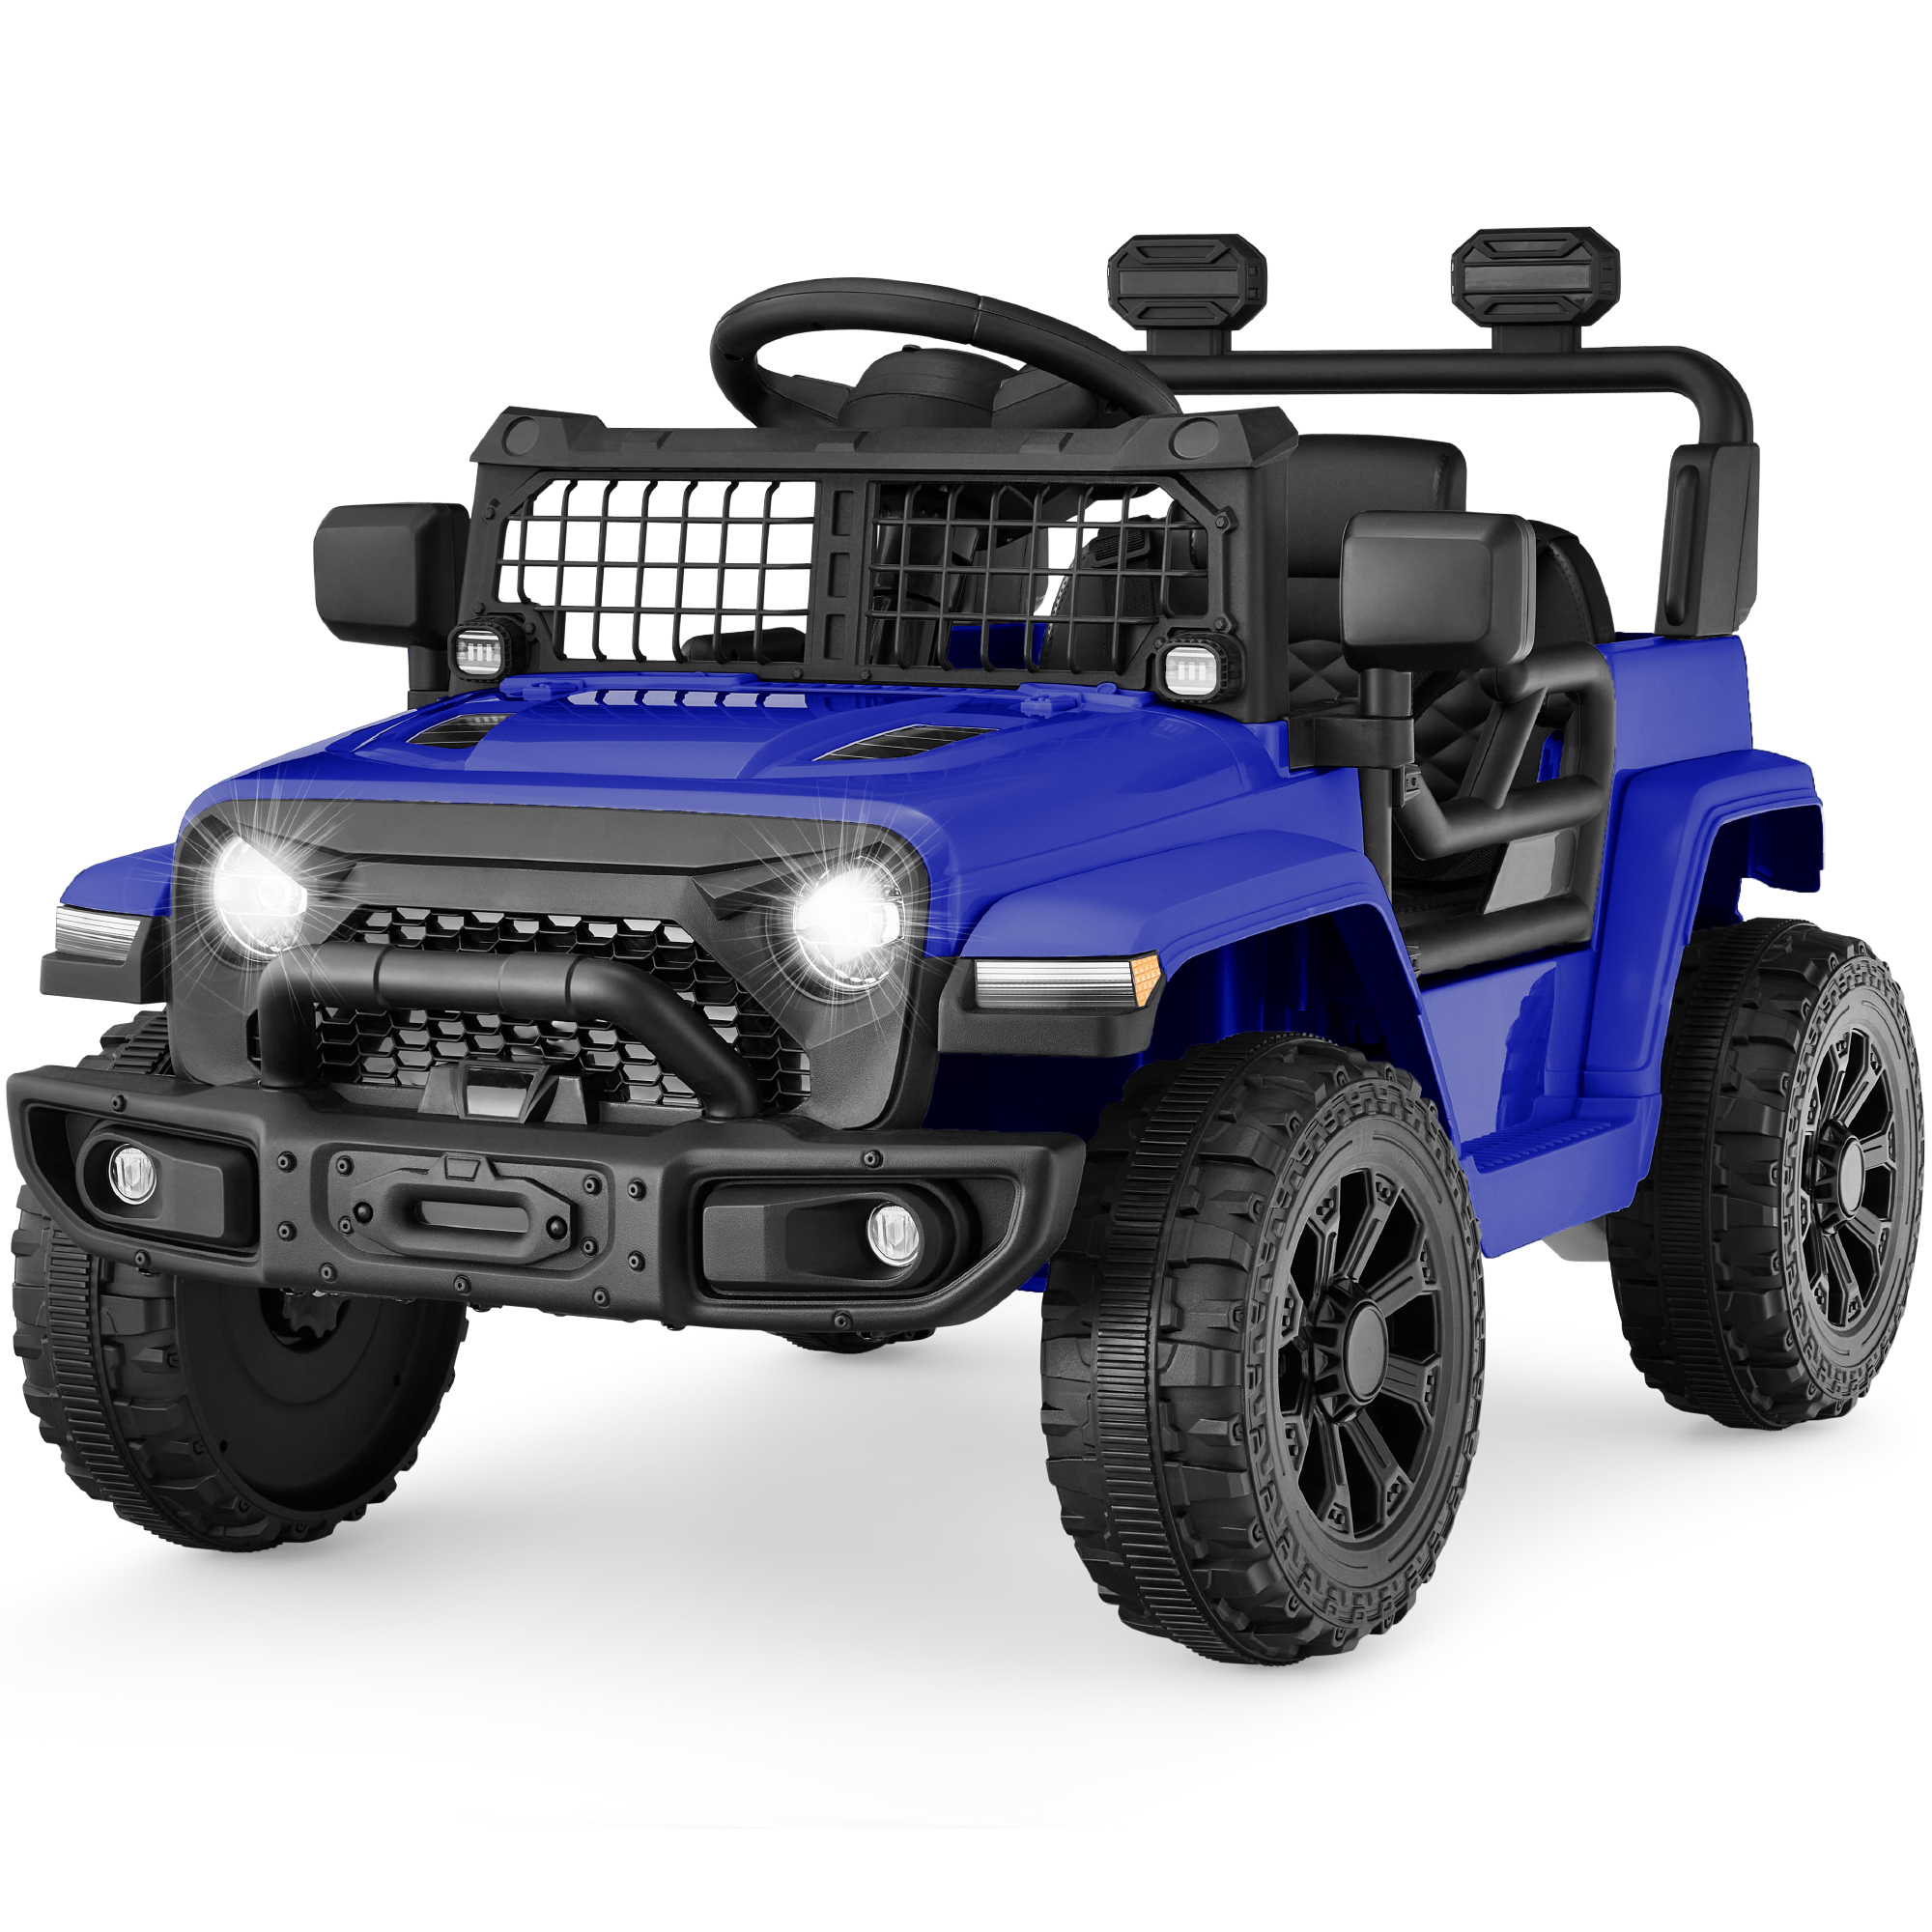 Best Choice Products 6V Kids Ride-On Truck Car w/ Parent Remote Control, 4-Wheel Suspension, LED Lights - Blue - image 1 of 8